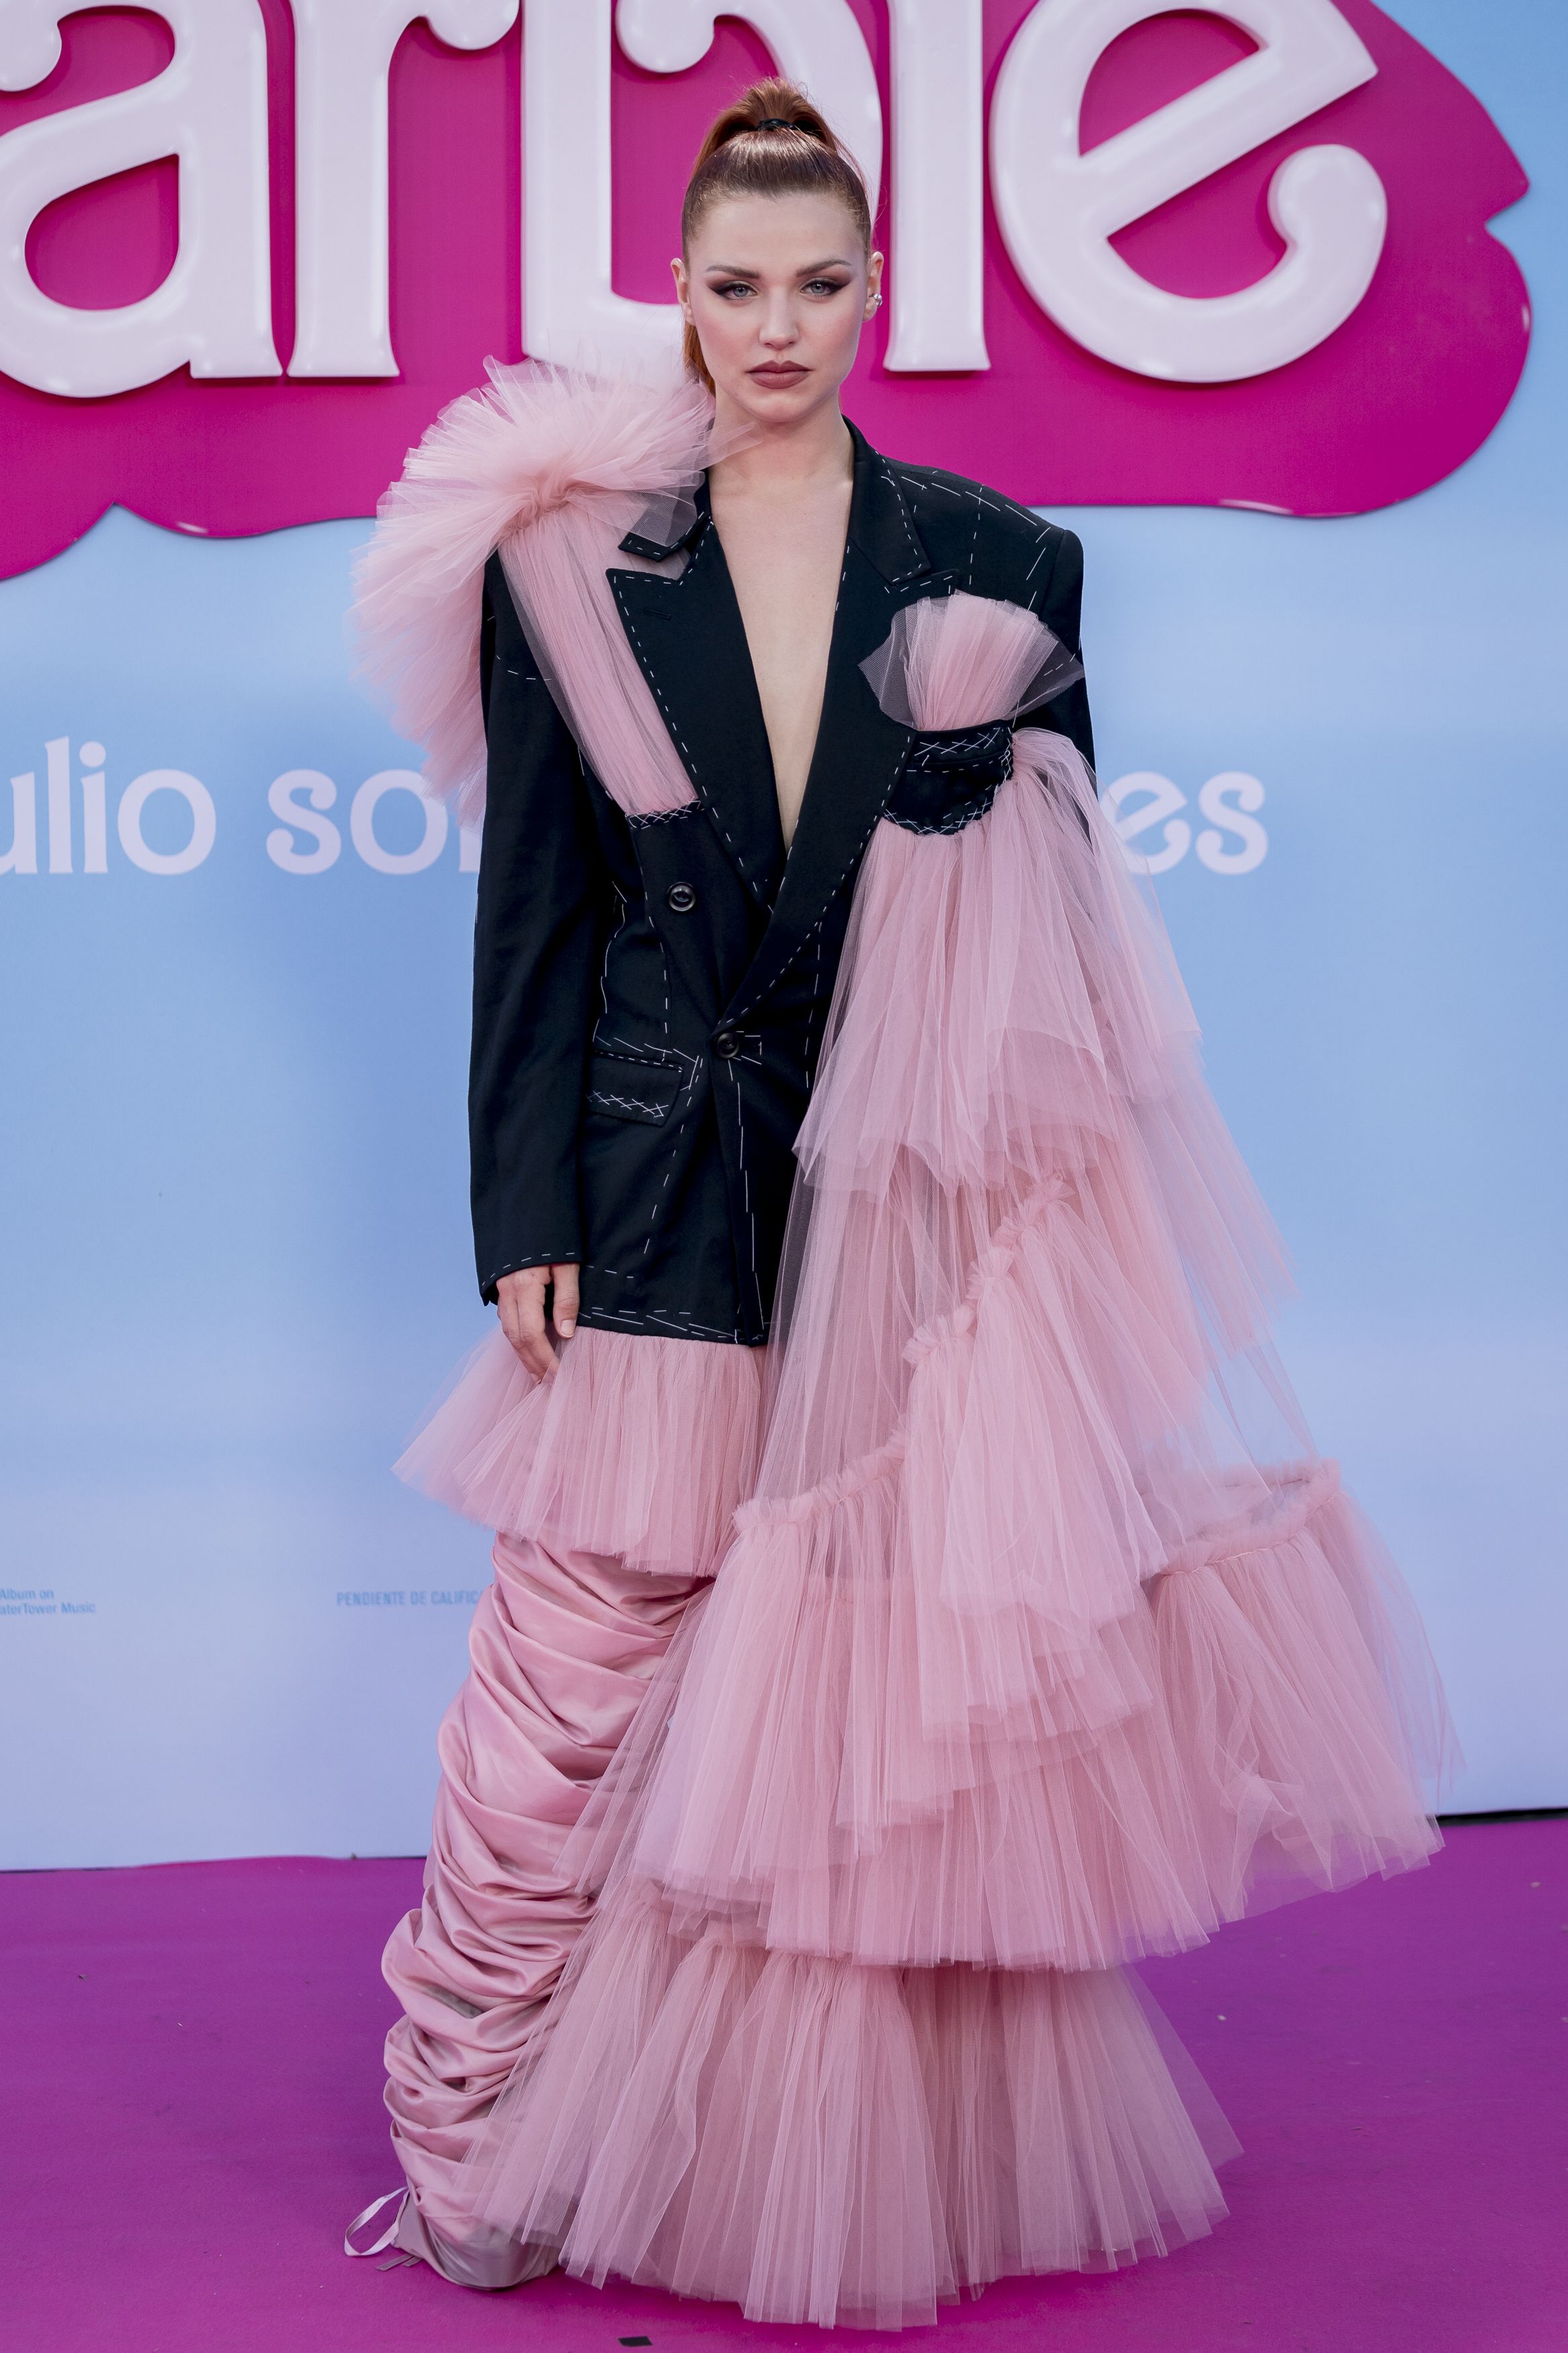 Why the 'Barbie' premiere in Madrid was the wildest so far